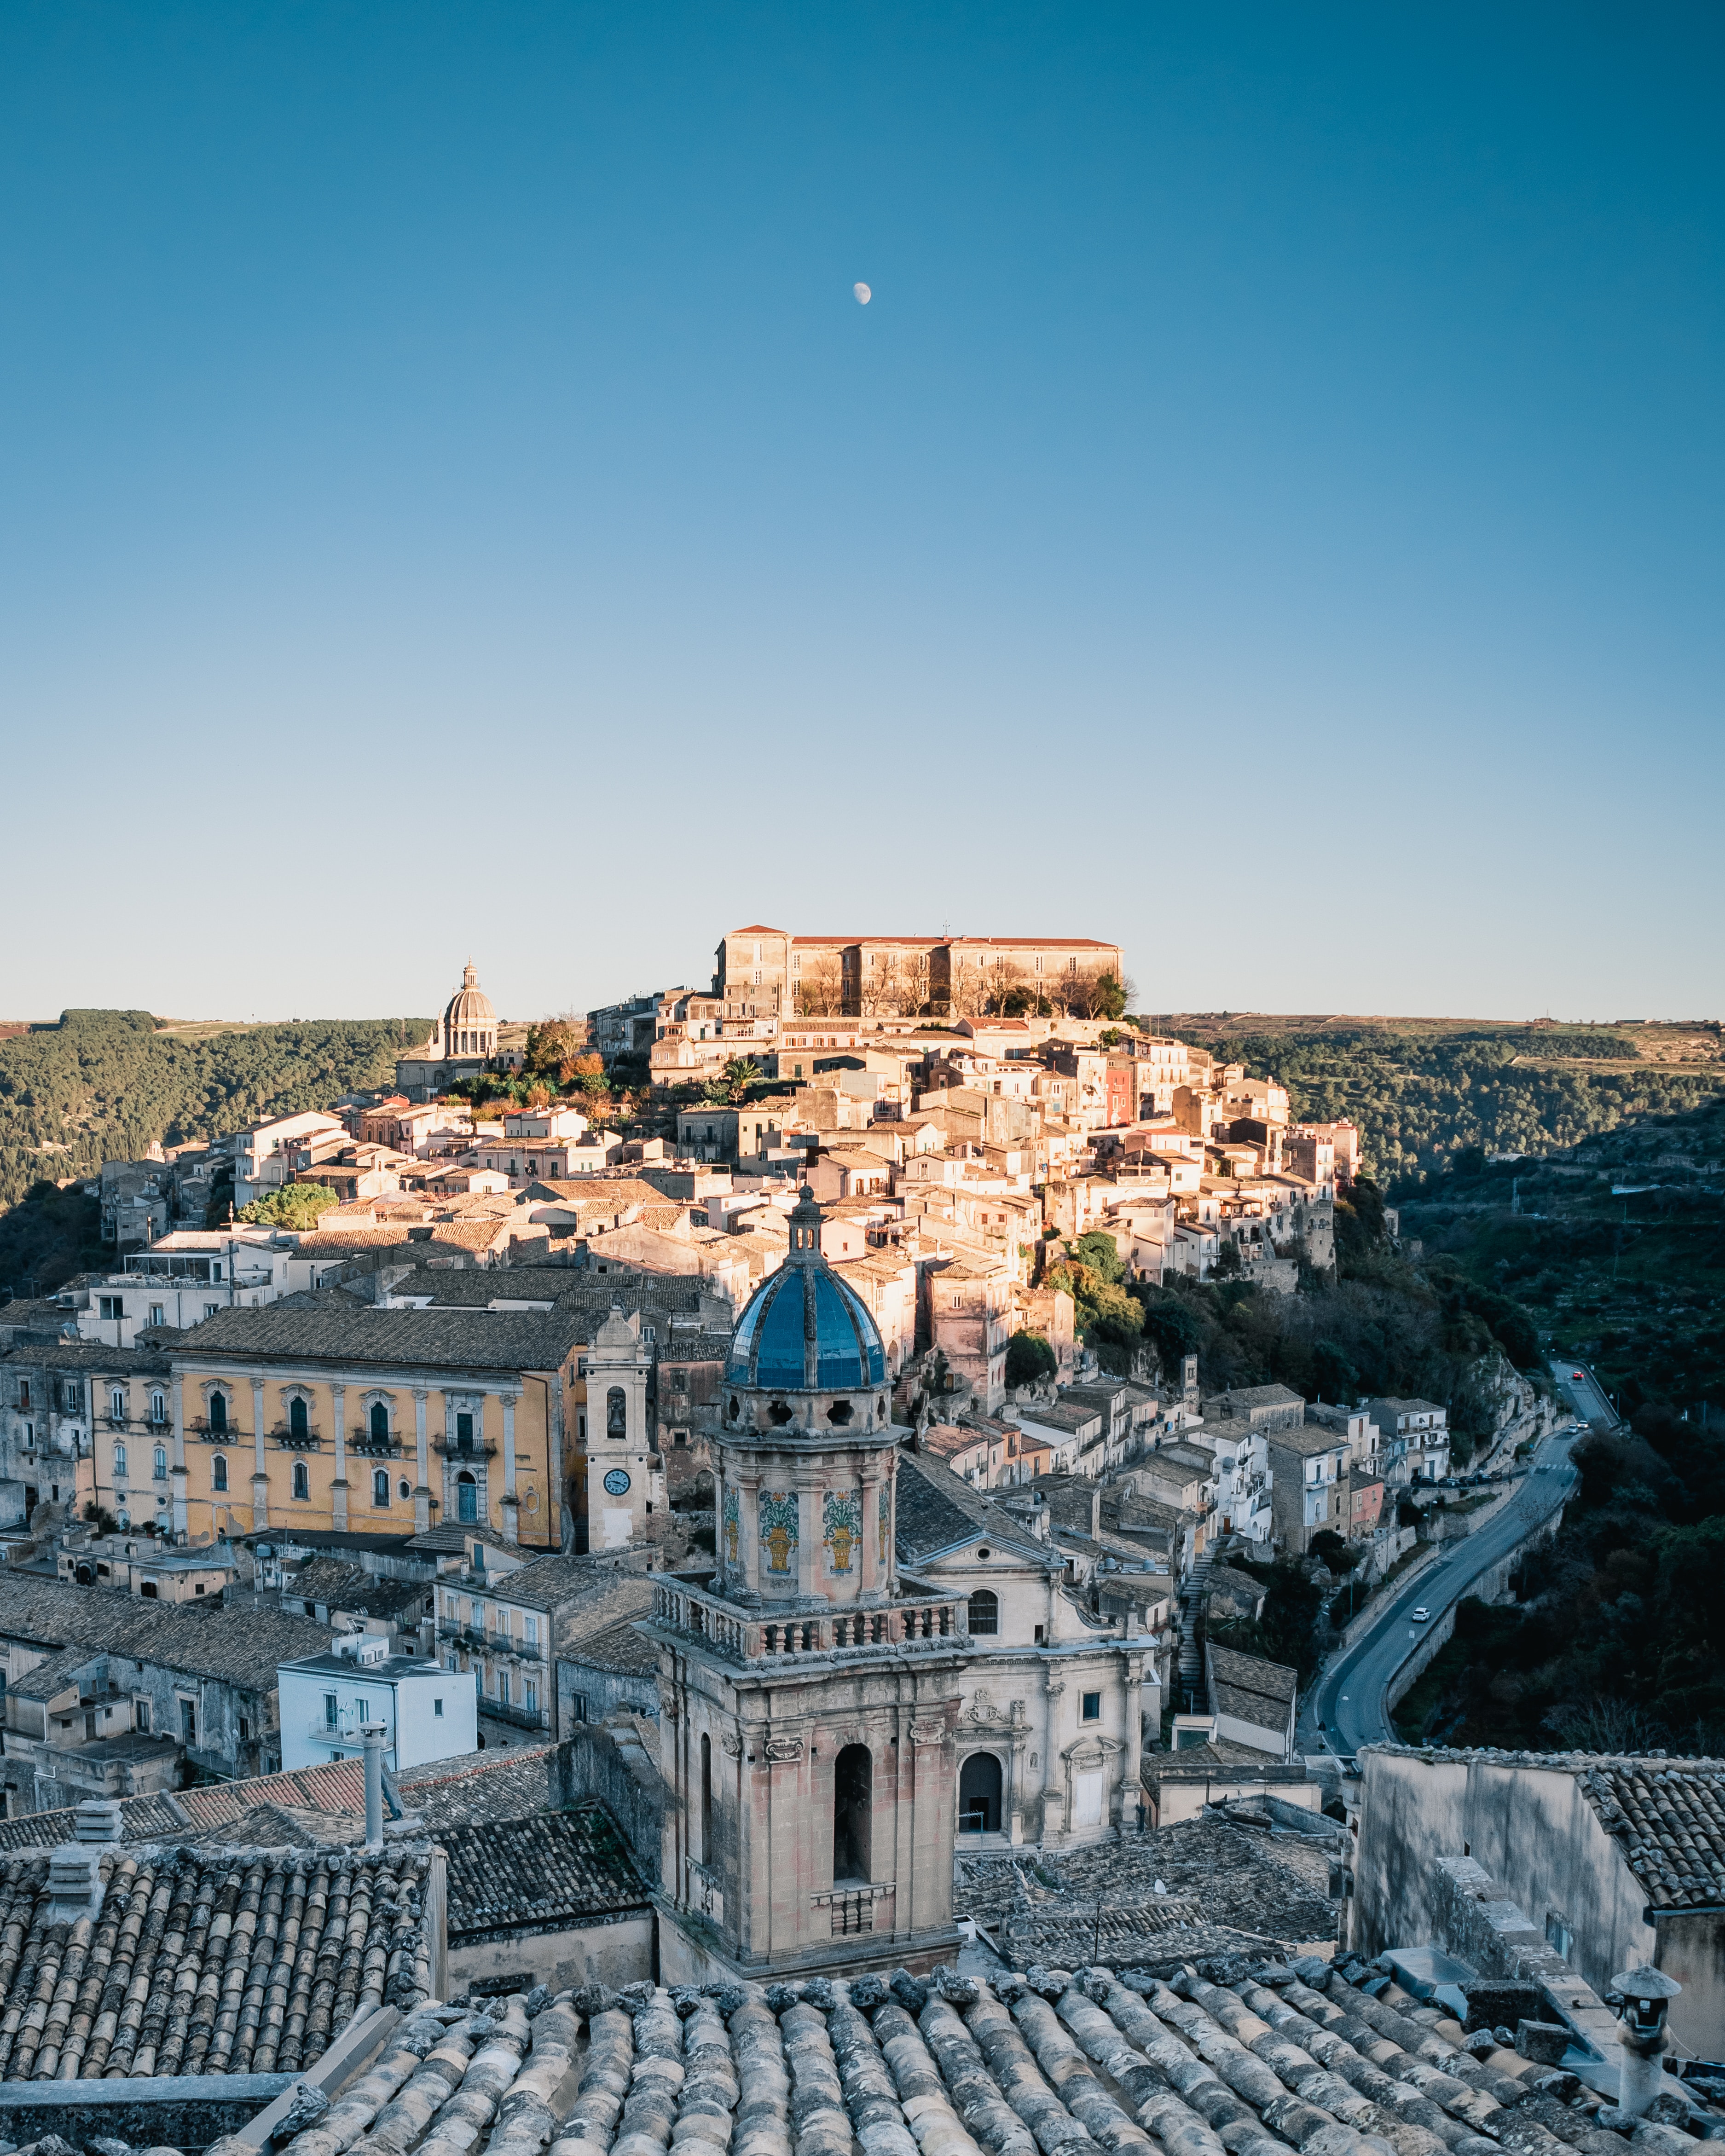 Mobile wallpaper view from above, cities, architecture, italy, city, building, ragusa